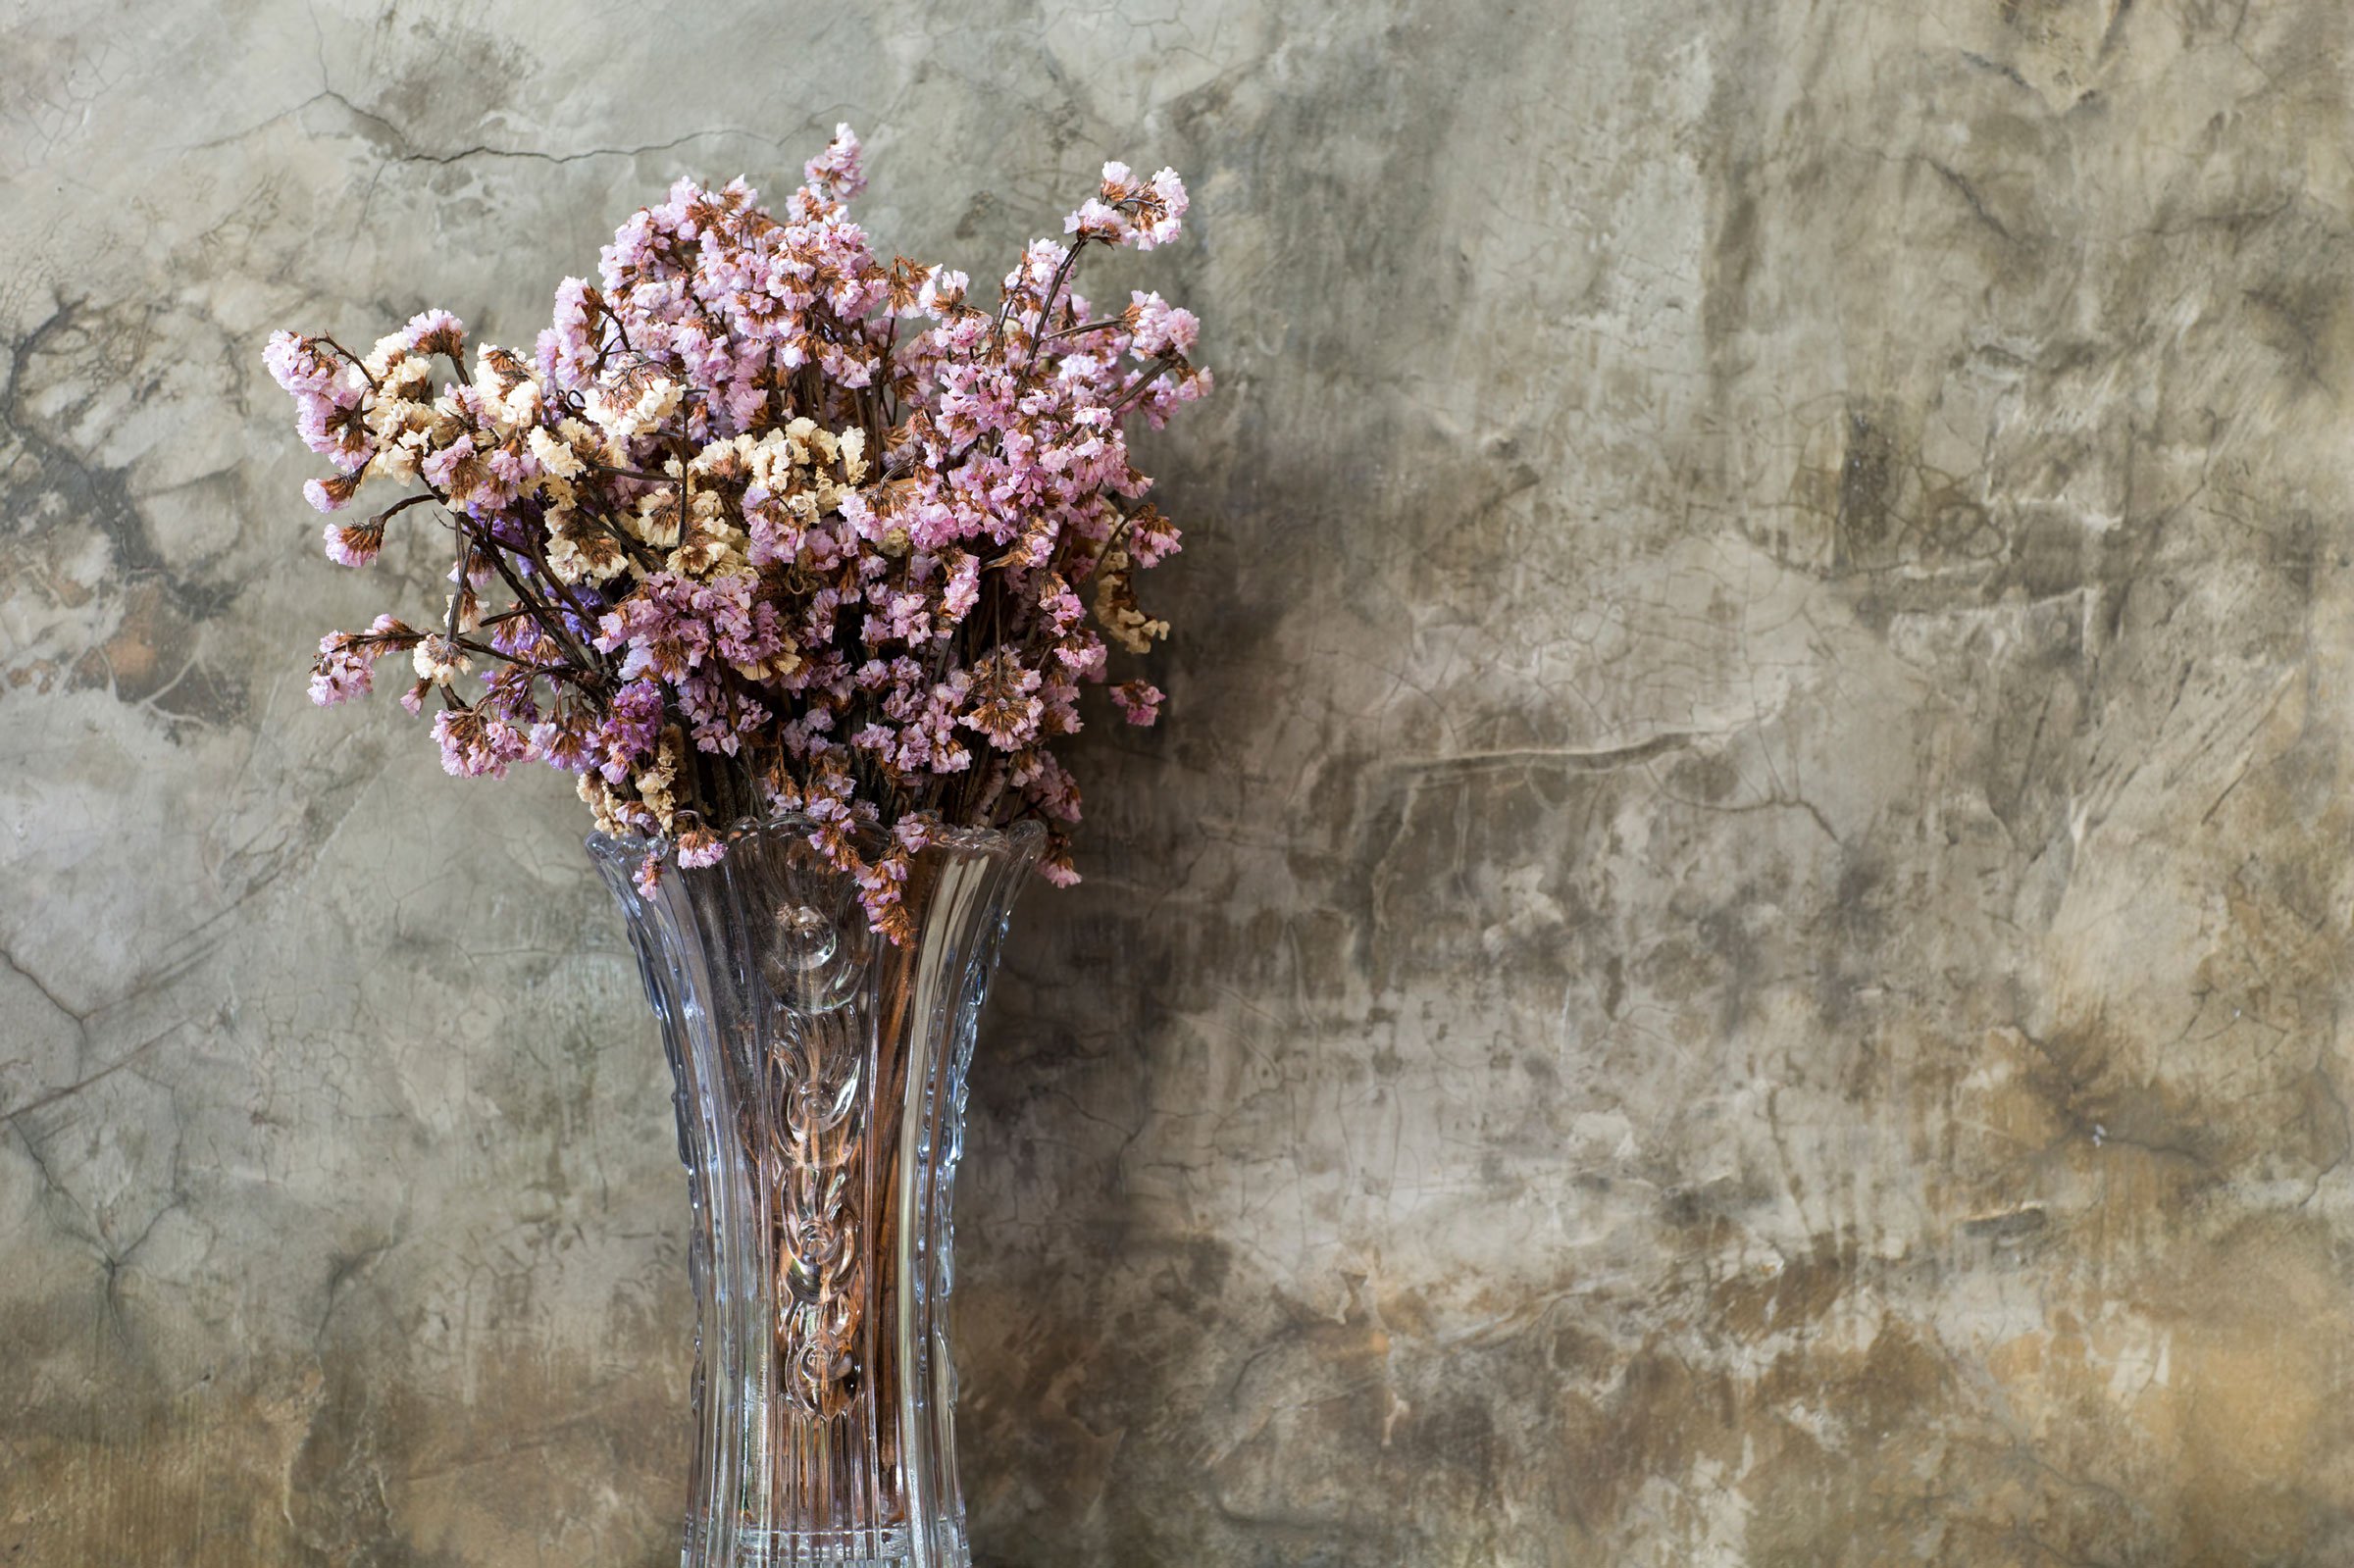 How to Dry Flowers: 5 Awesome Ways to Preserve a Bouquet | Reader's ...